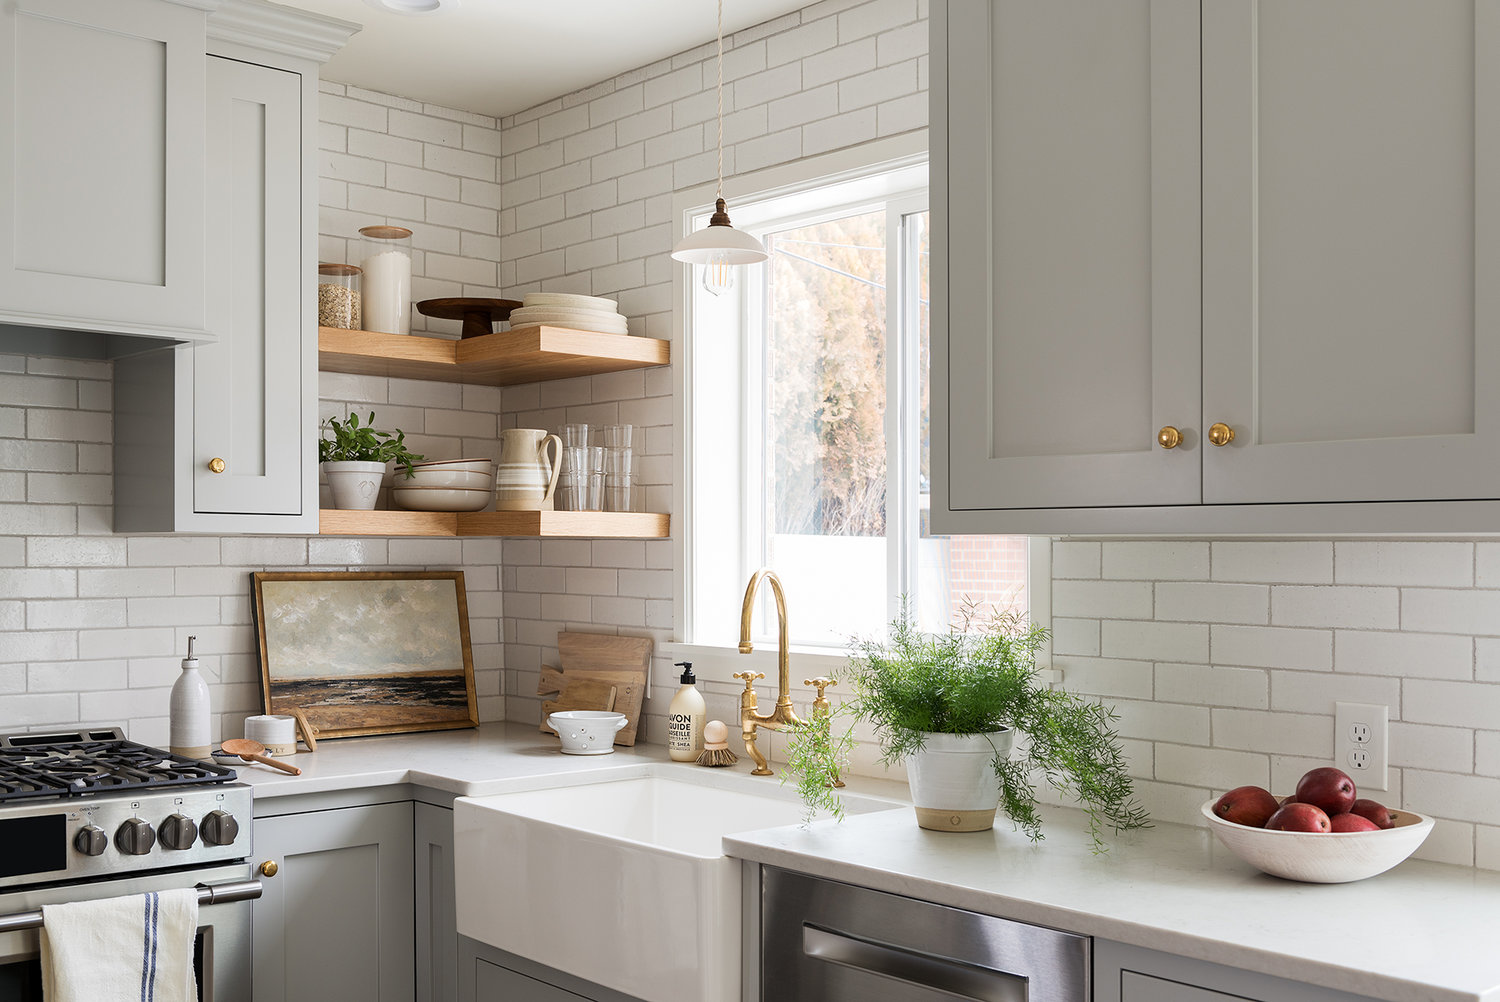 8 Great Neutral Cabinet Colors For, Best Kitchen Cabinet Paint Colors Benjamin Moore